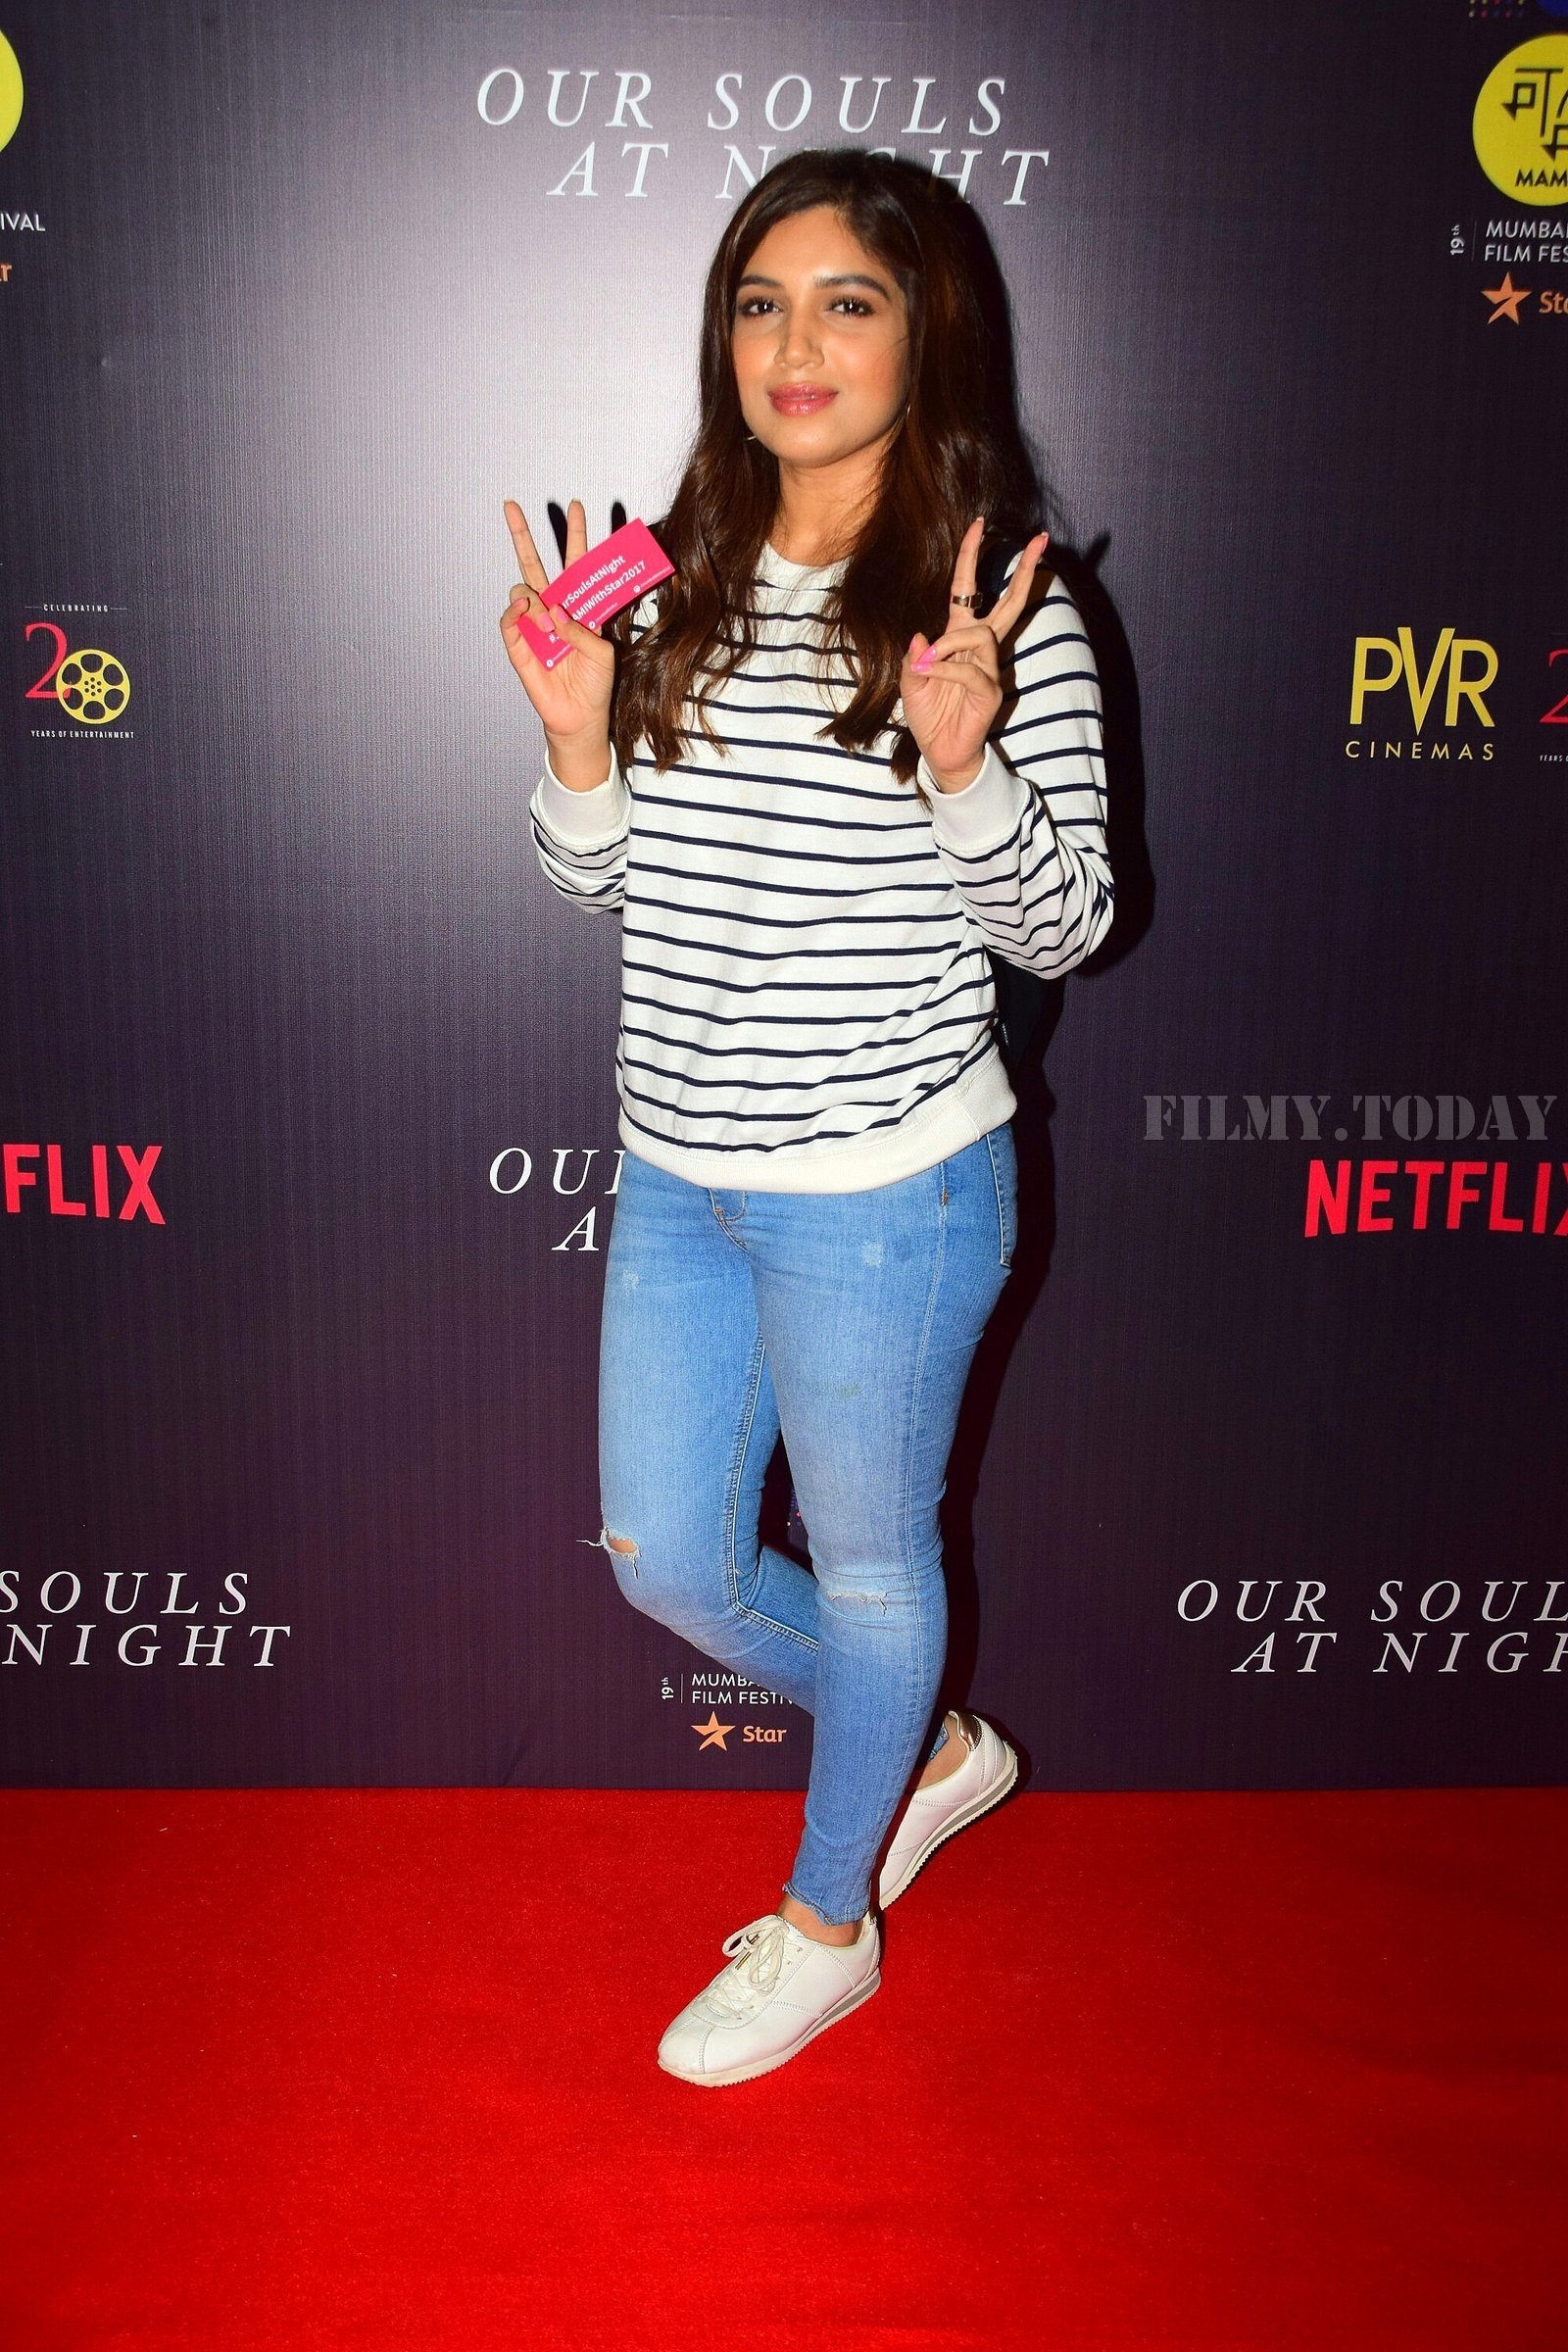 Bhumi Pednekar - In Pics: Special Screening Of Film Our Souls At Night | Picture 1529452